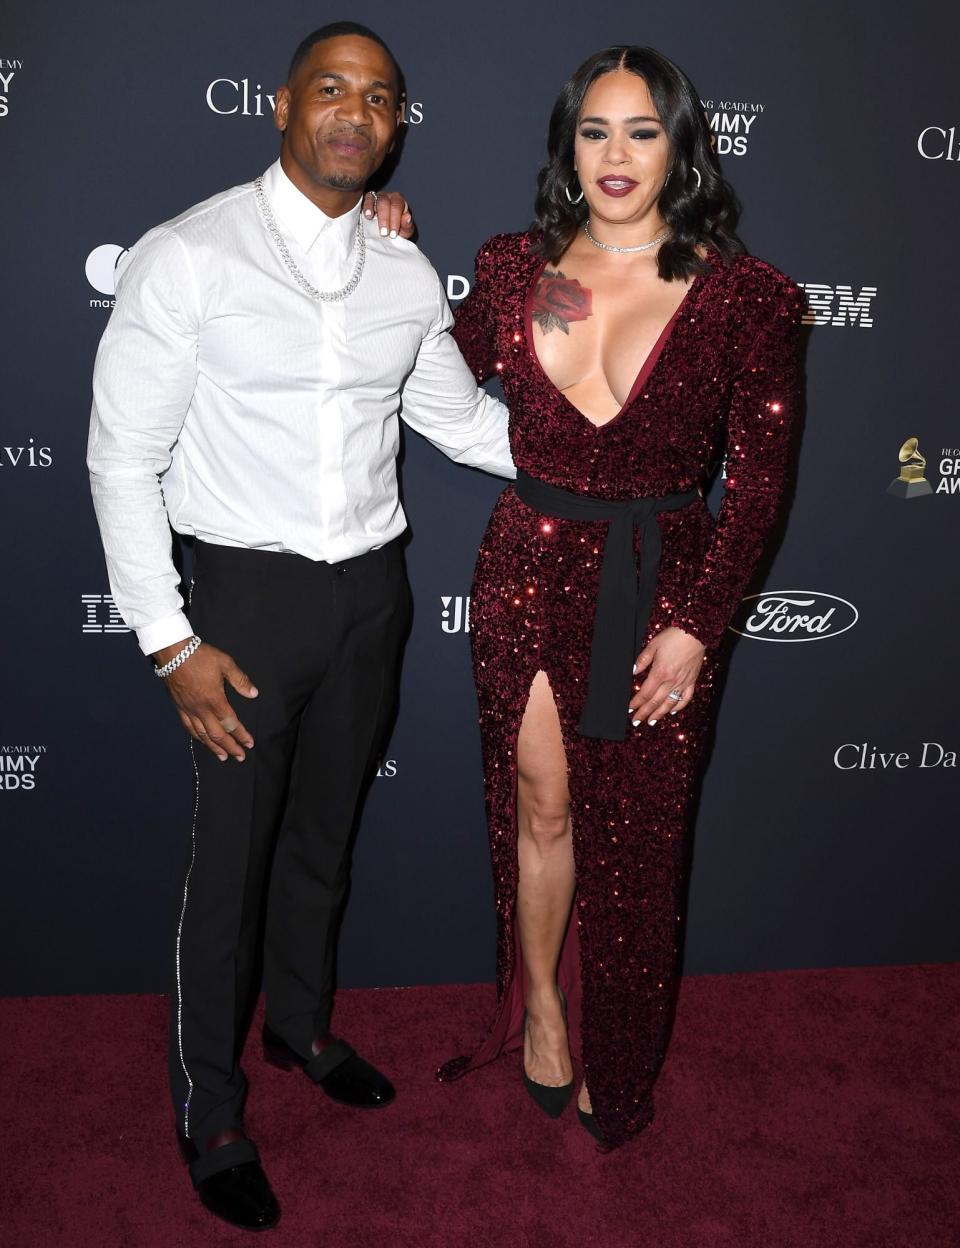 BEVERLY HILLS, CALIFORNIA - JANUARY 25: Stevie J and Faith Evans arrives at the Pre-GRAMMY Gala and GRAMMY Salute to Industry Icons Honoring Sean "Diddy" Combs at The Beverly Hilton Hotel on January 25, 2020 in Beverly Hills, California. (Photo by Steve Granitz/WireImage)